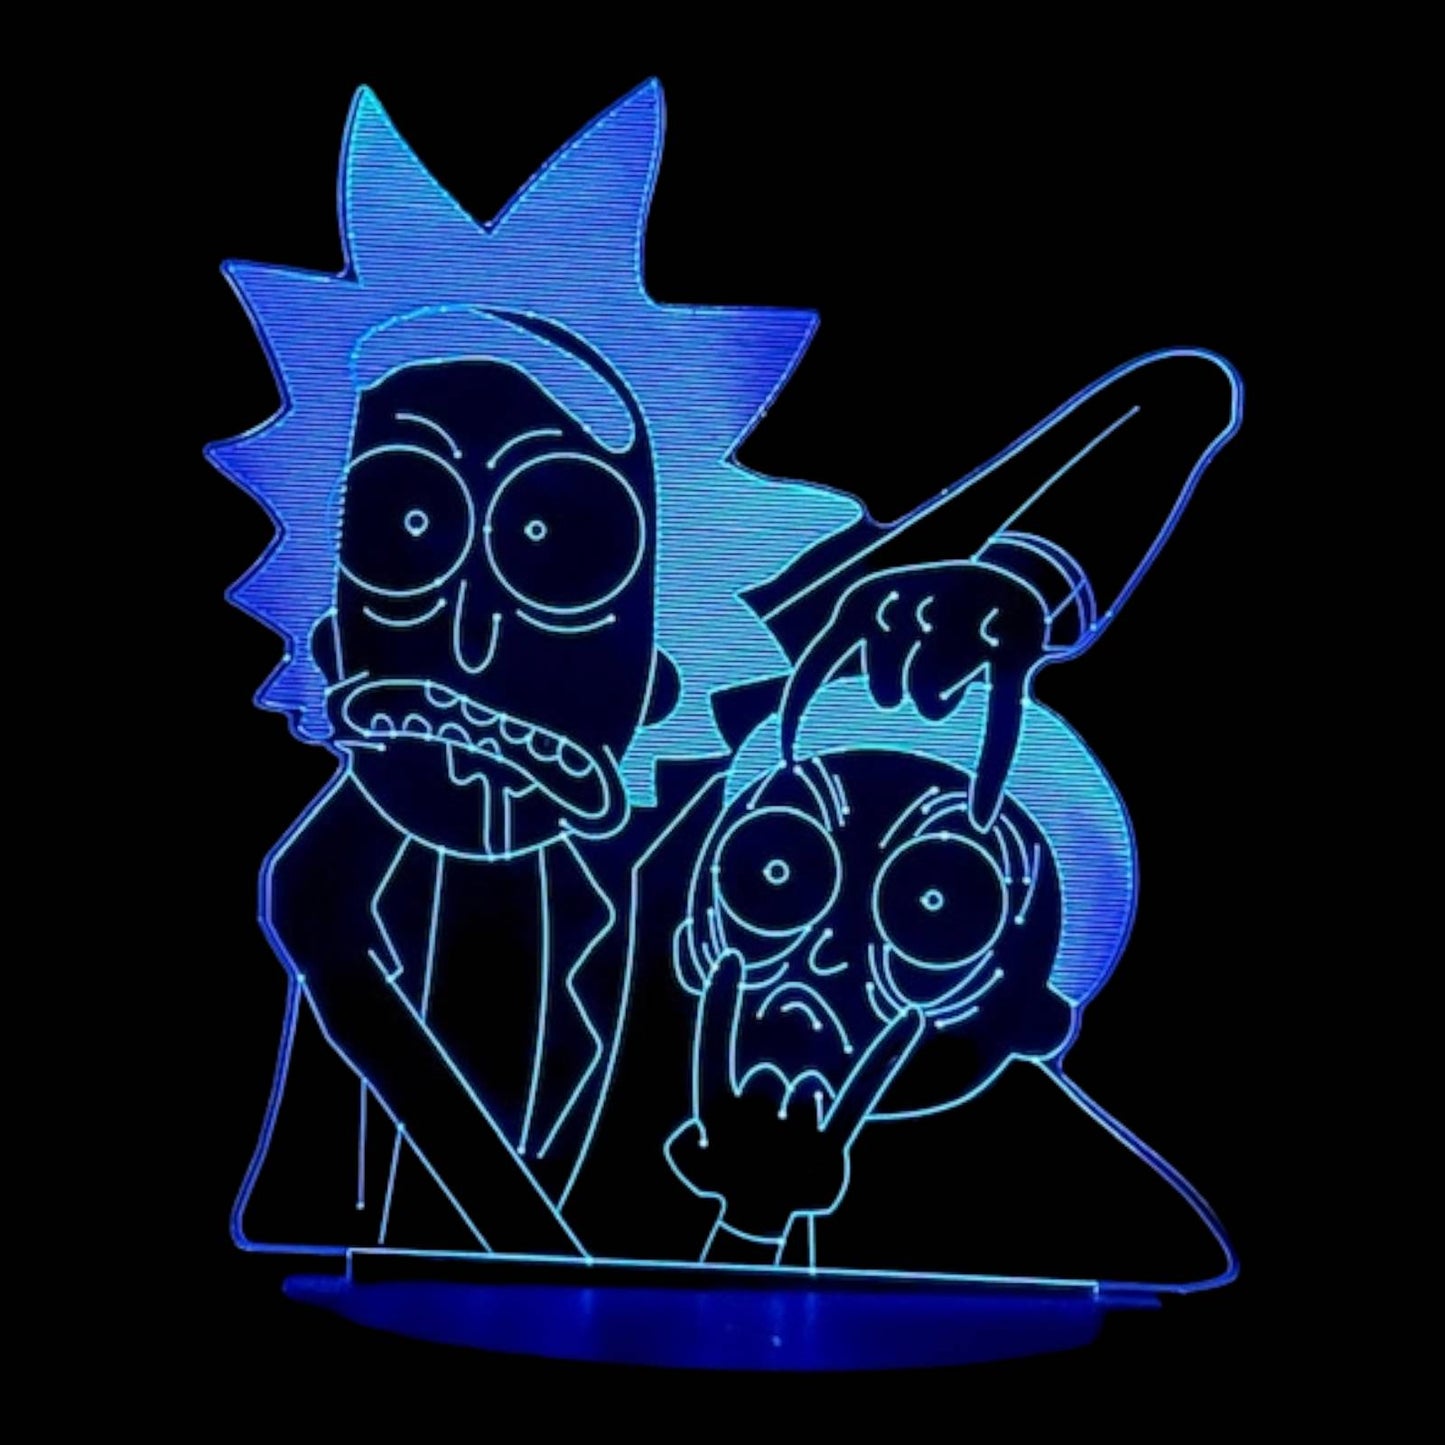 Rick and Morty 3D LED Night-Light 7 Color Changing Lamp w/ Touch Switch